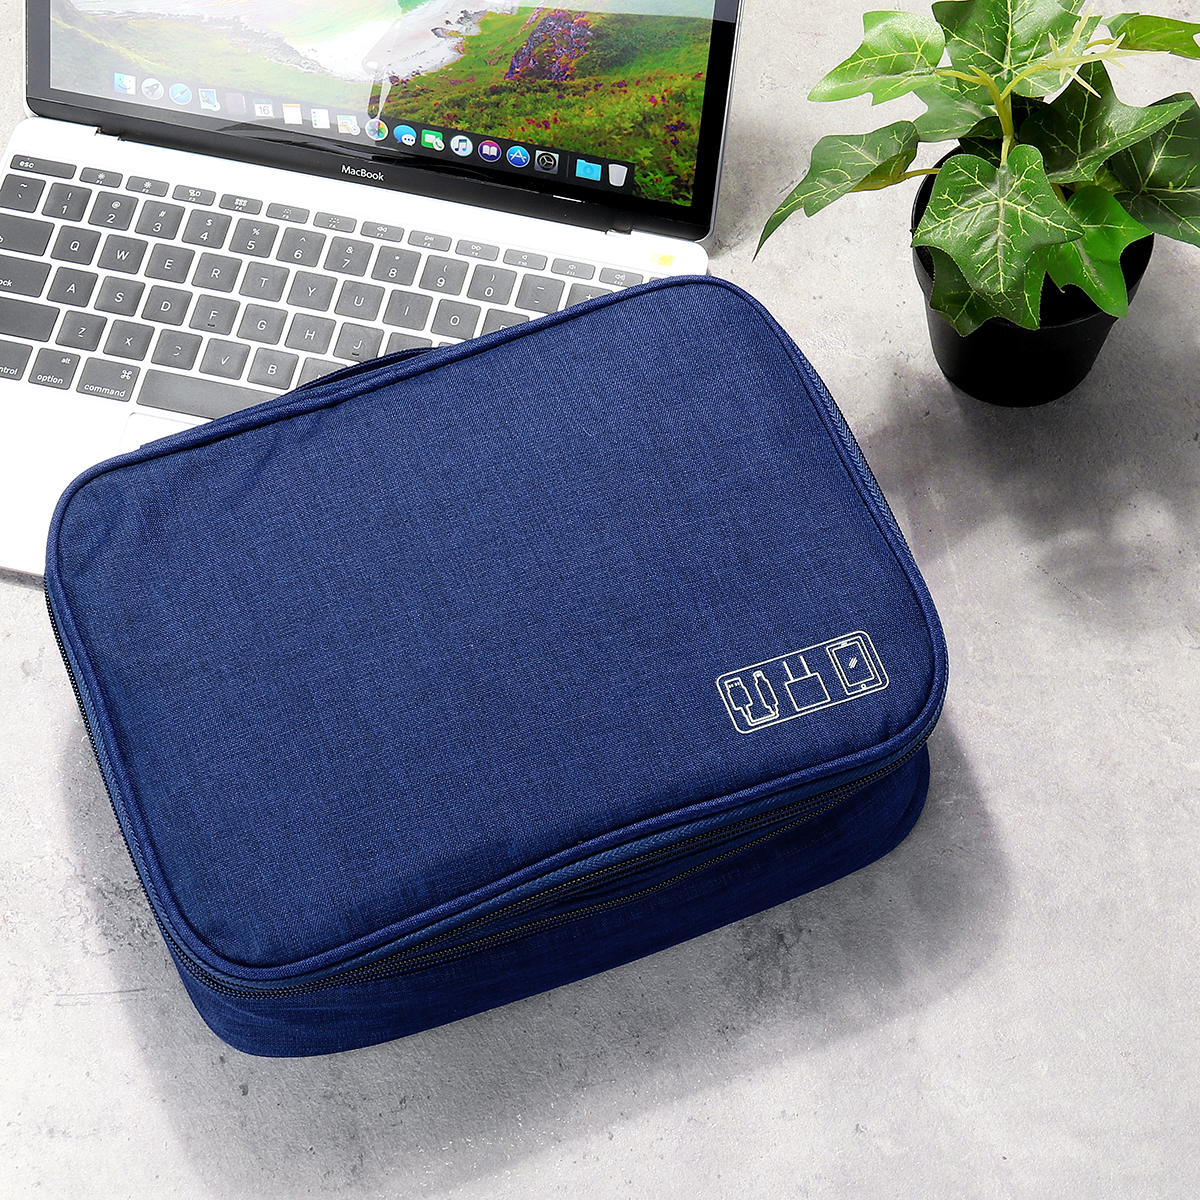 Data-Cable-Storage-Bag-Multifunctional-Digital-Devices-Stationery-Case-Portable-Travel-Electronic-Po-1782315-8